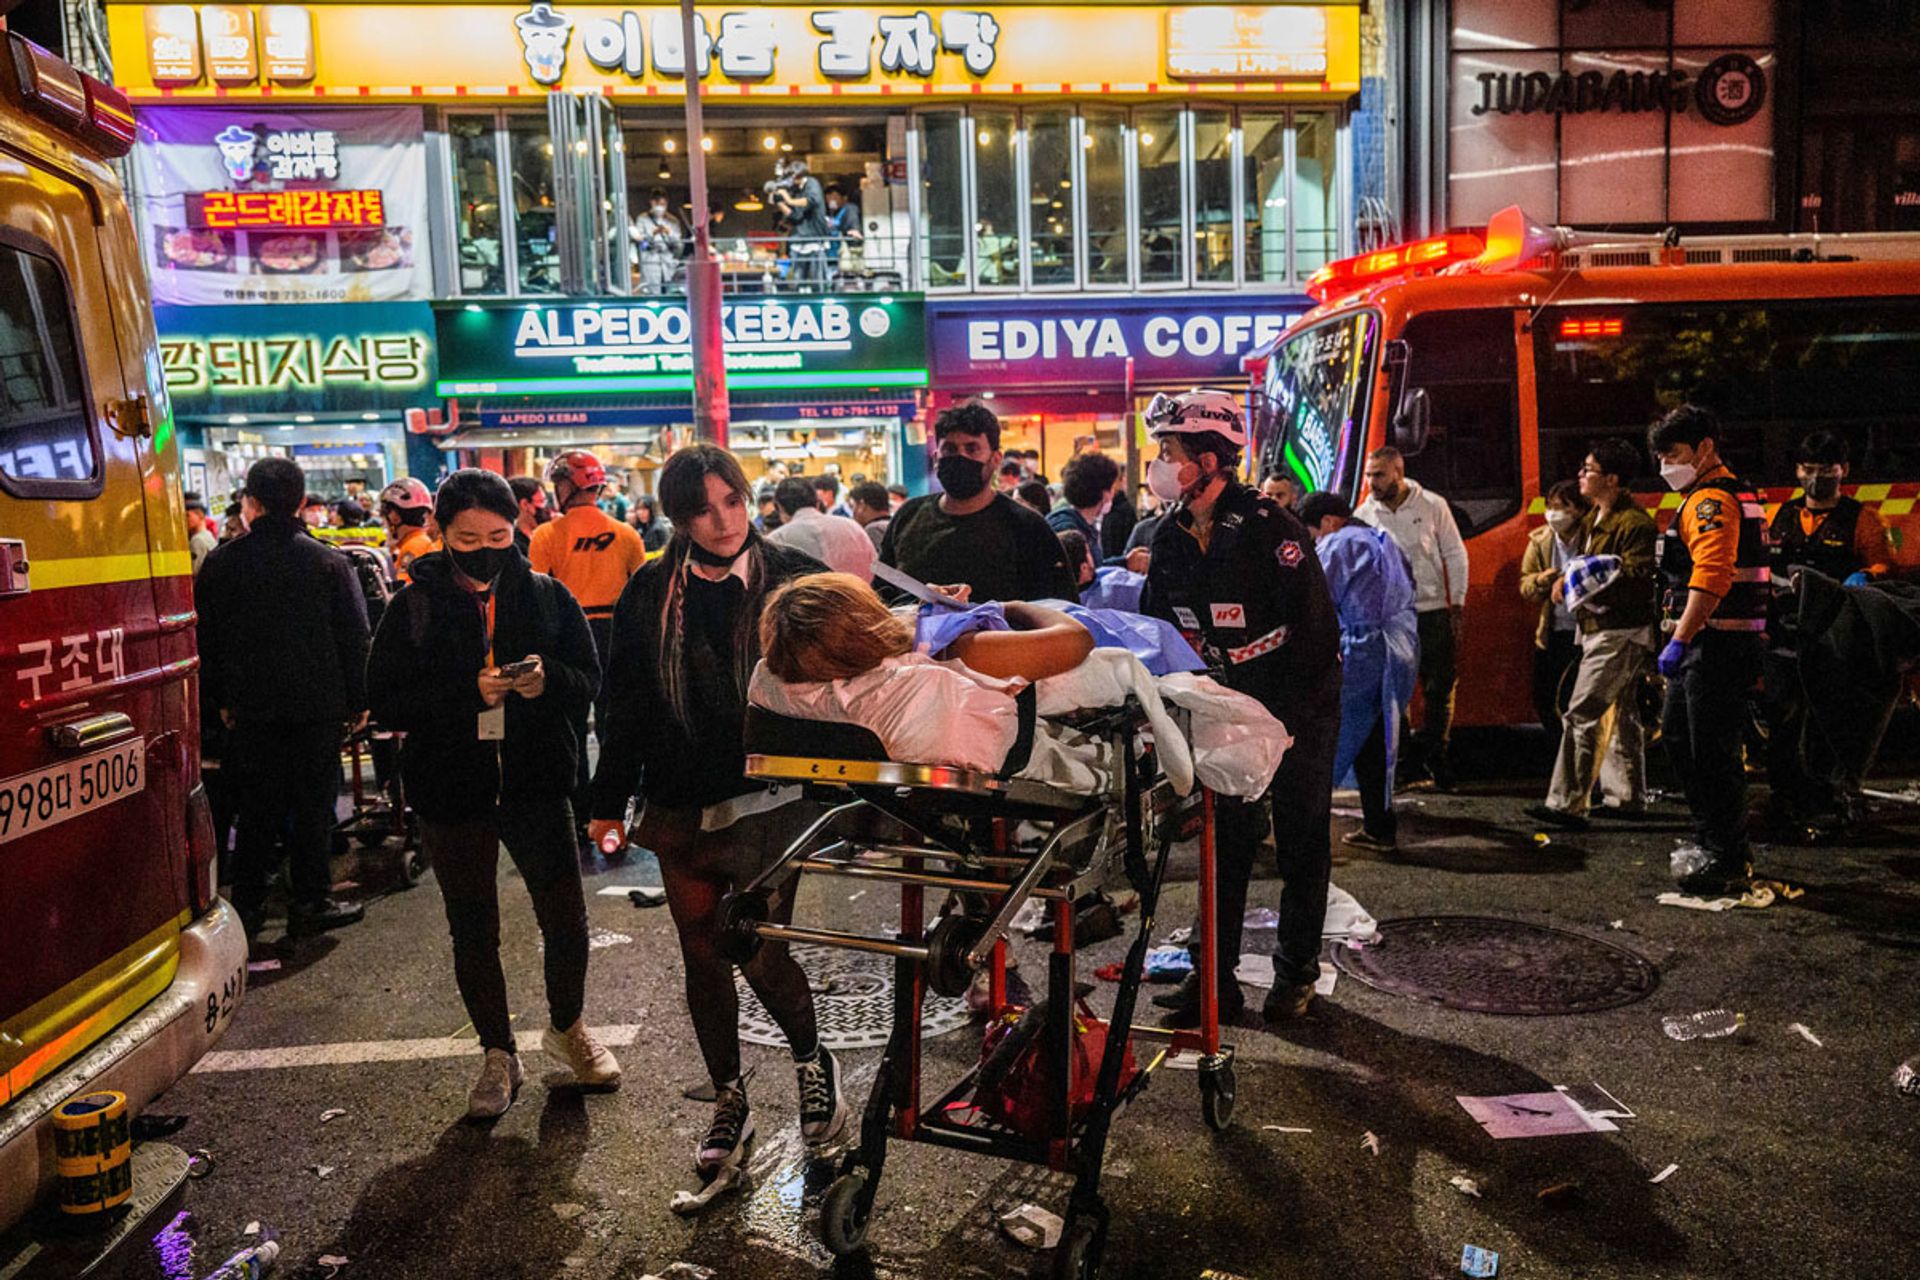 First responders helping an injured person on a stretcher  in the immediate aftermath of  the Oct 29 disaster in an Itaewon alleyway. PHOTO: AFP